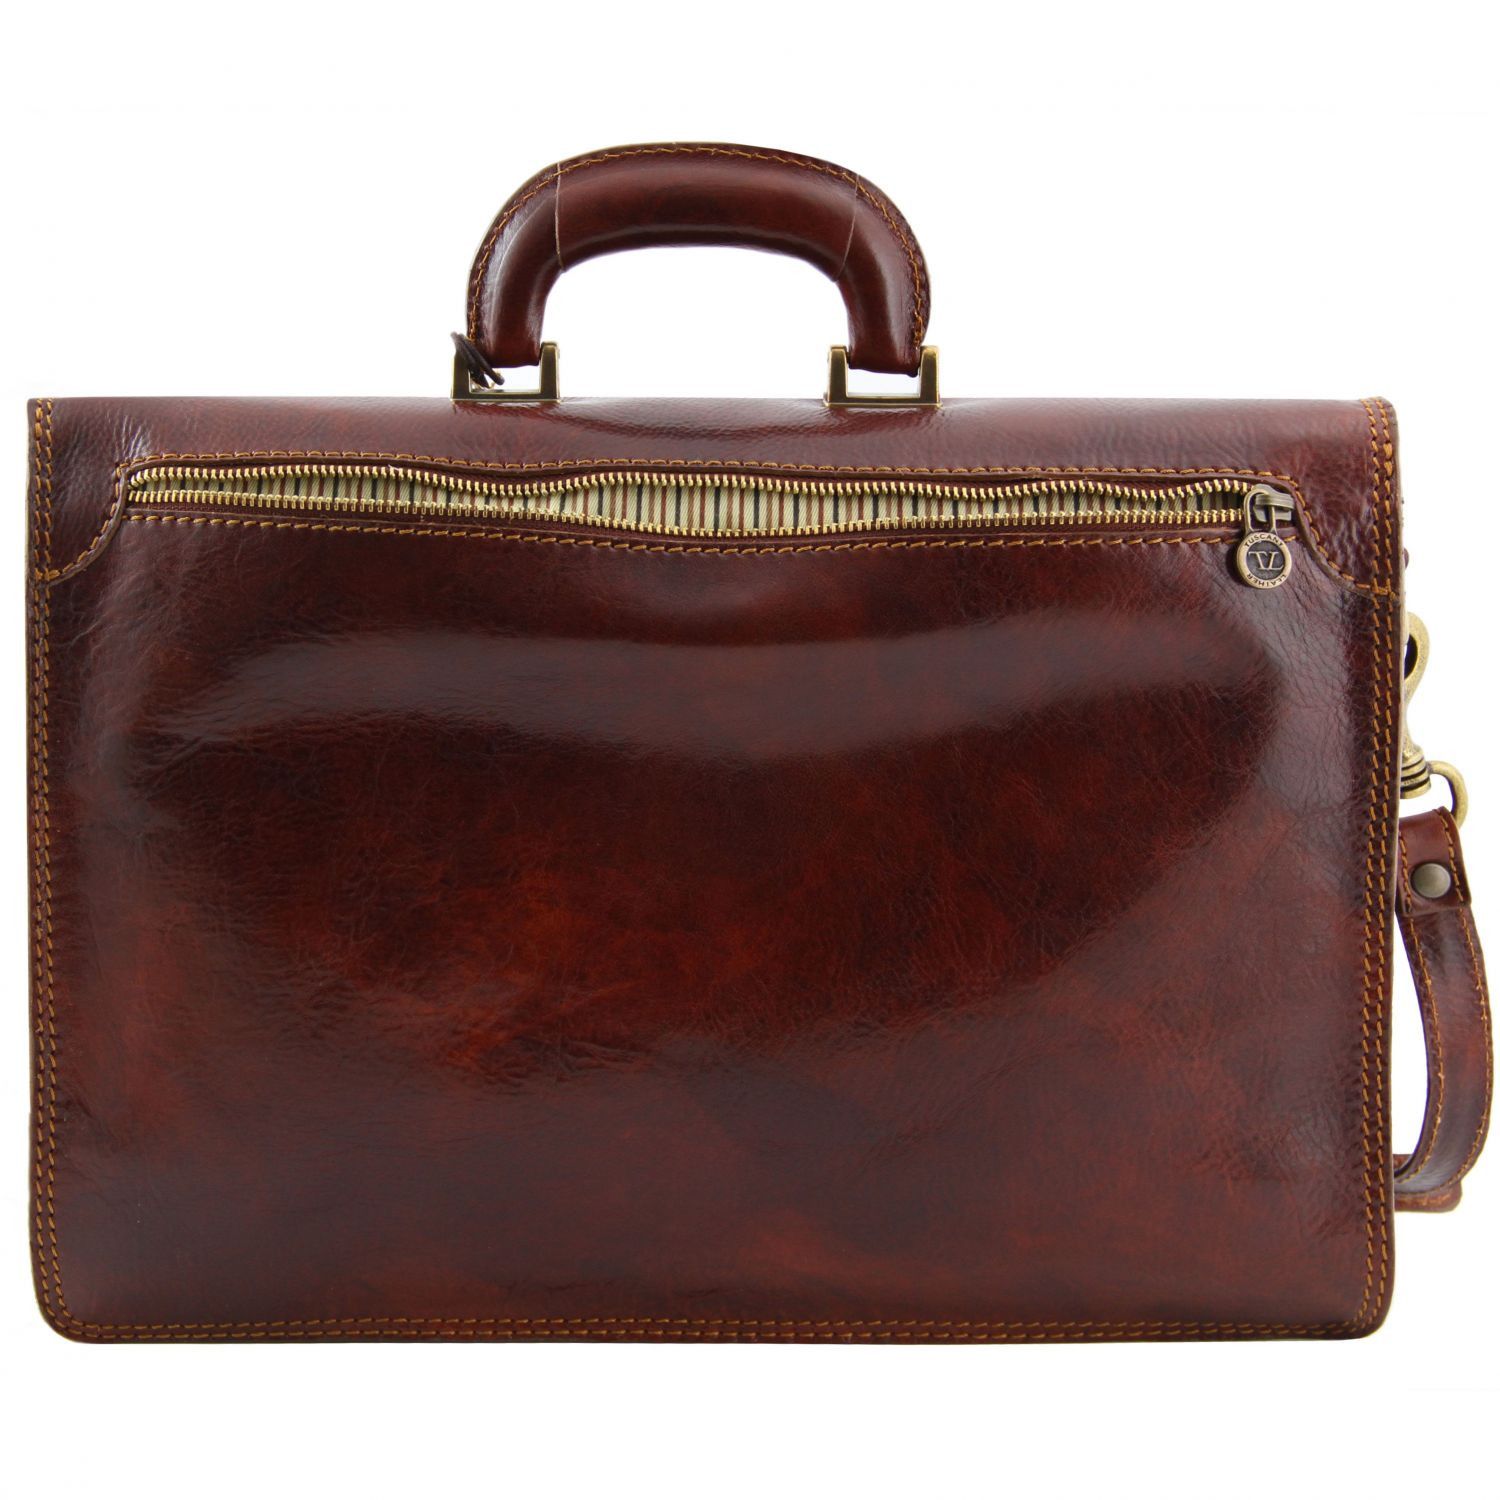 Amalfi - Leather Briefcase 1 Compartment Brown TL10050